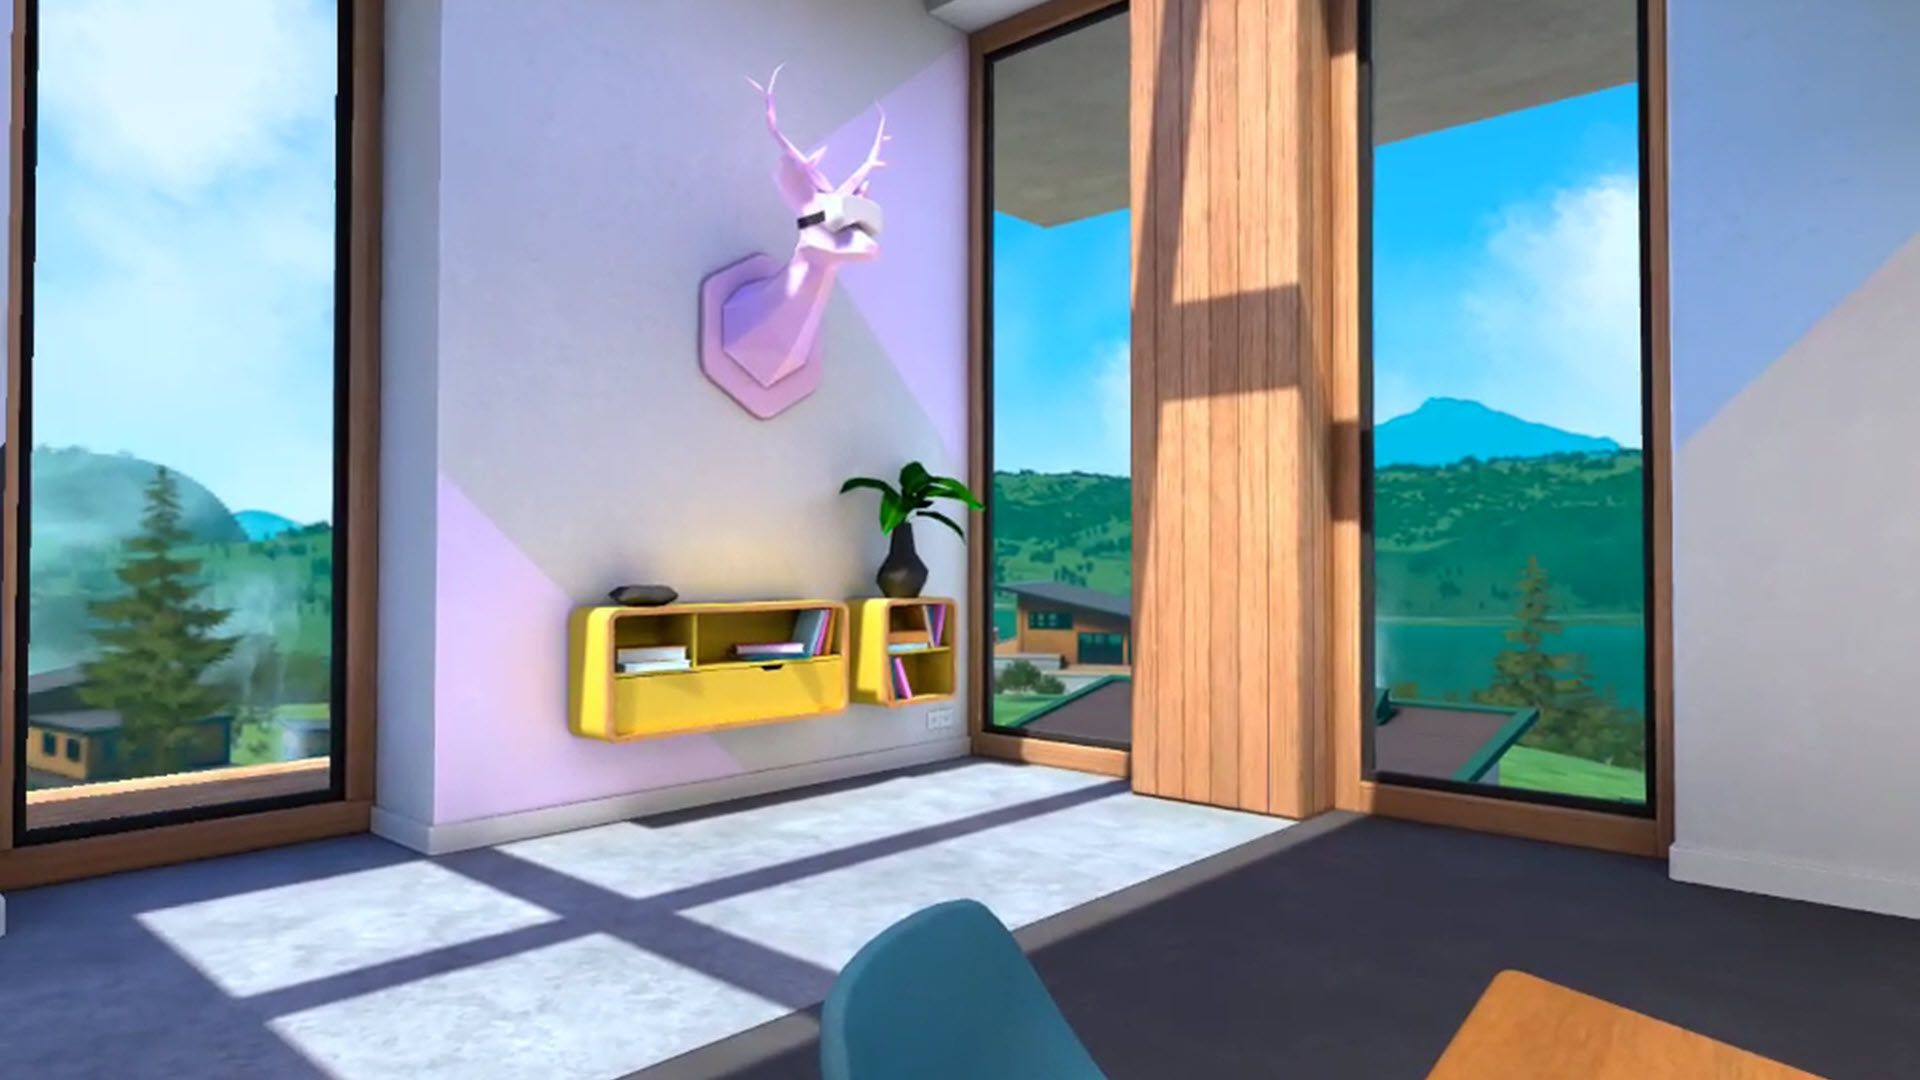 A VR deer head on a wall wearing a VR headset